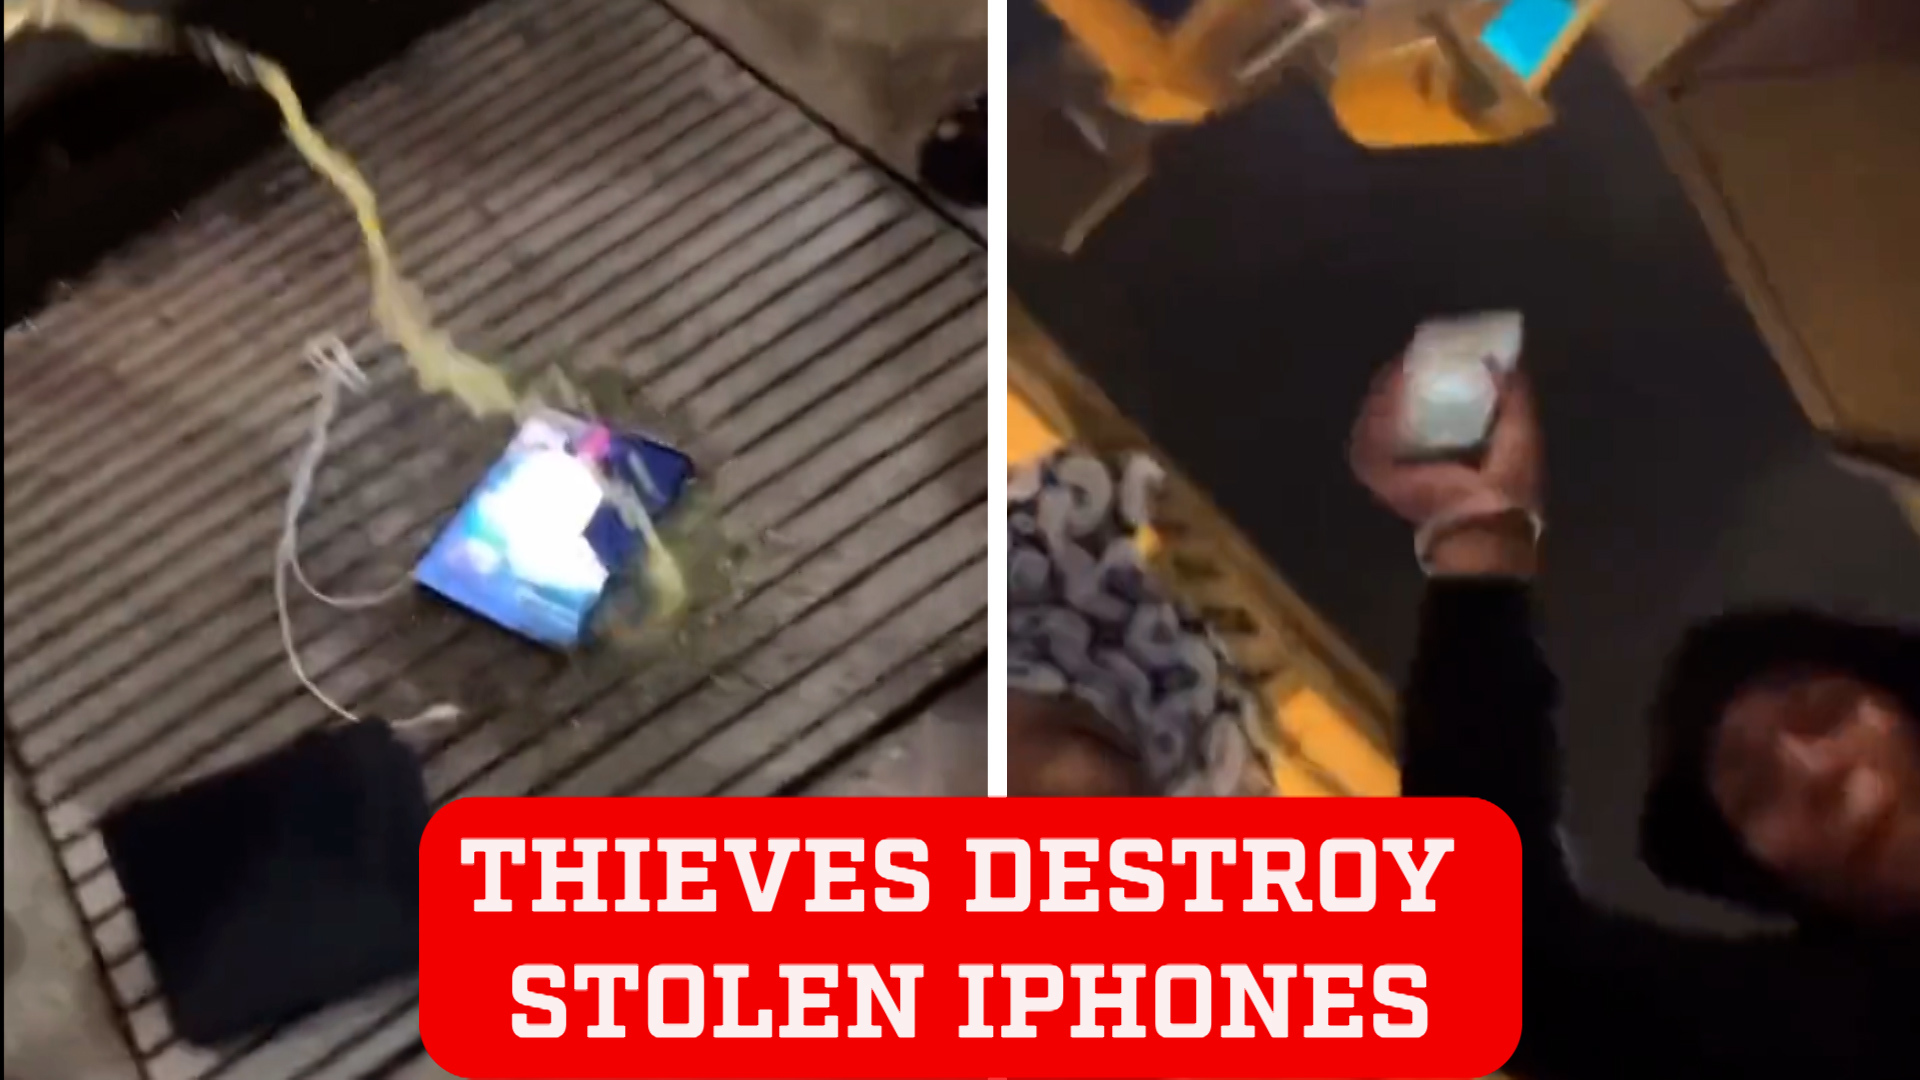 Thieves frantically destroy stolen iPhones in Philadelphia after realizing they're being tracked by police